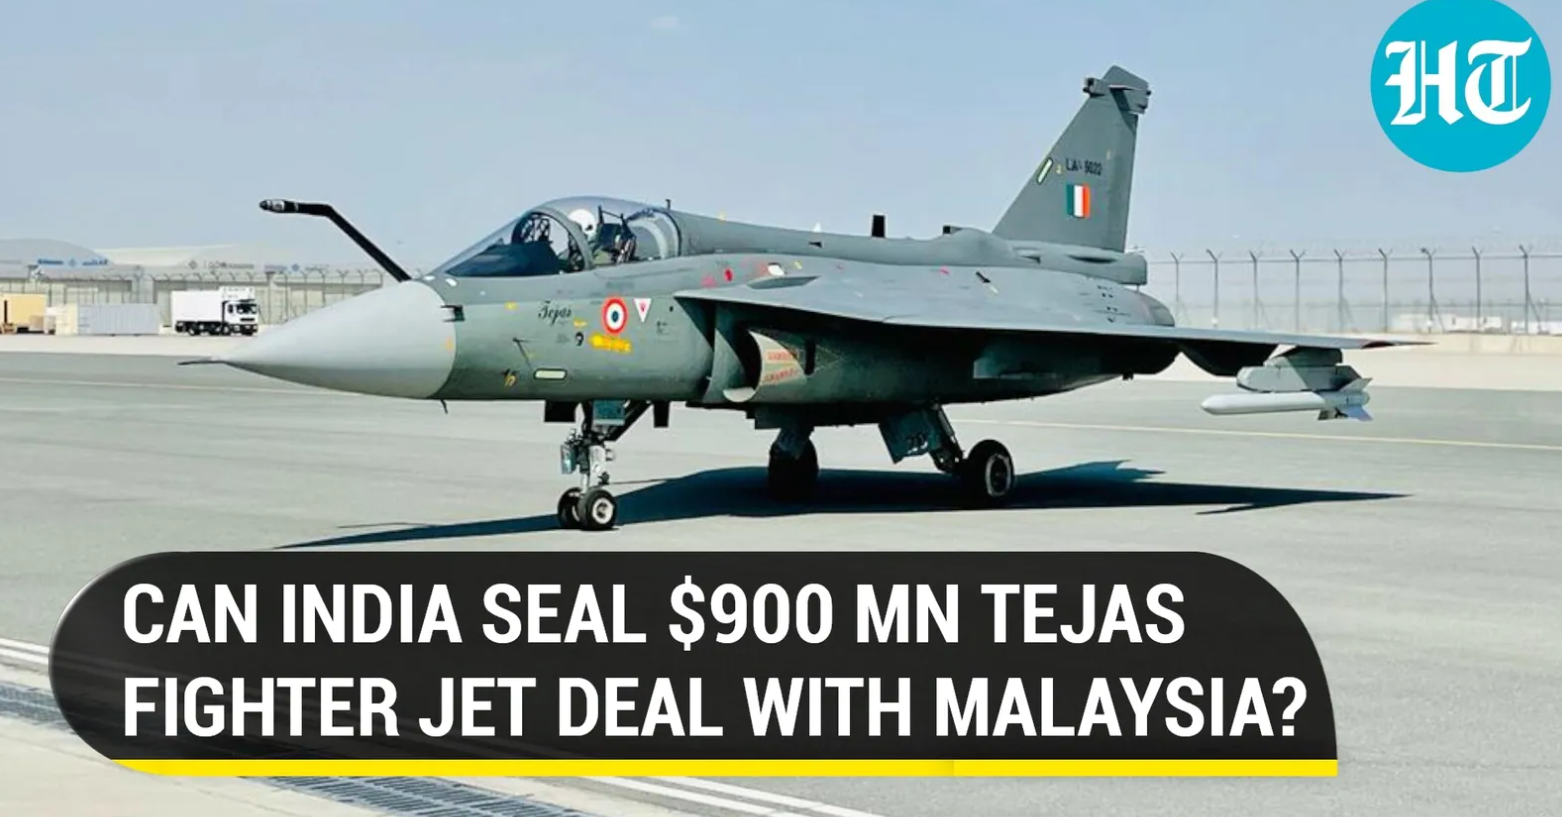 India's LCA Tejas And Turkey's Hurjet: Who Will Malaysia Choose For Big Fat $900 Million Jet Deal